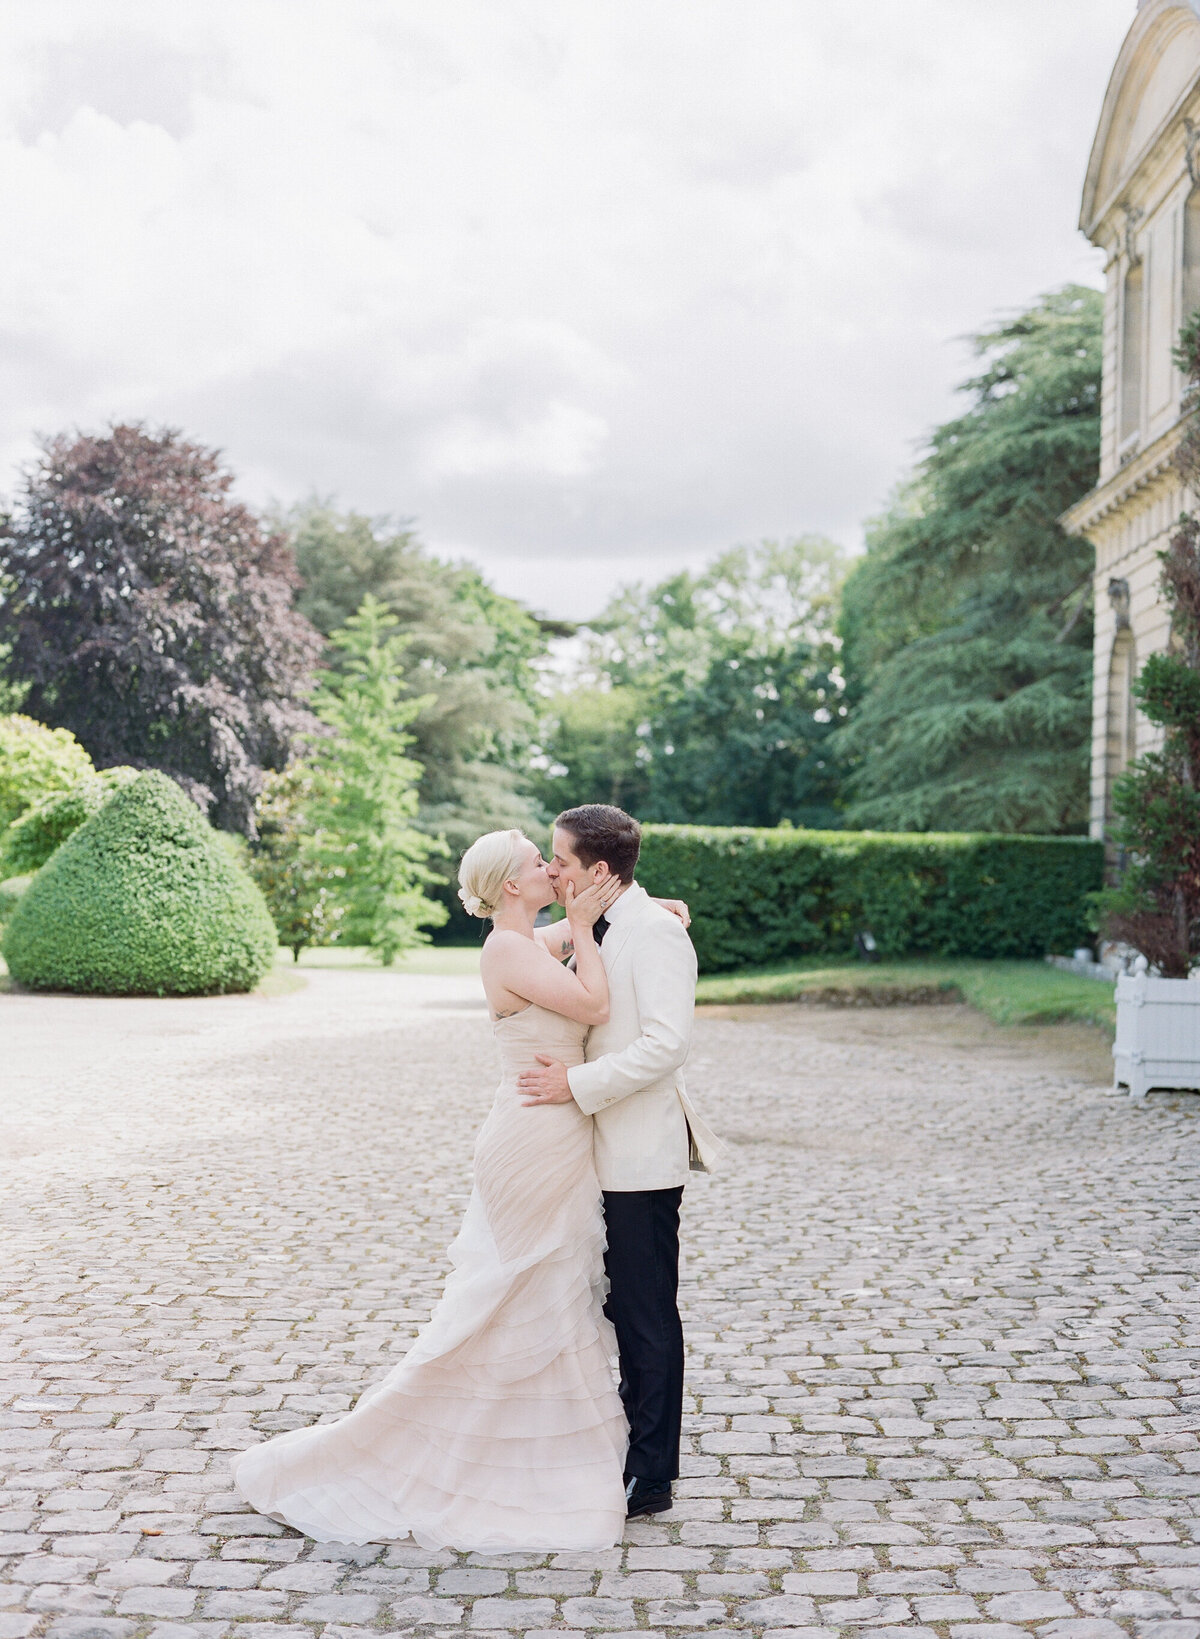 Jennifer Fox Weddings English speaking wedding planning & design agency in France crafting refined and bespoke weddings and celebrations Provence, Paris and destination Laurel-Chris-Chateau-de-Champlatreaux-Molly-Carr-Photography-48